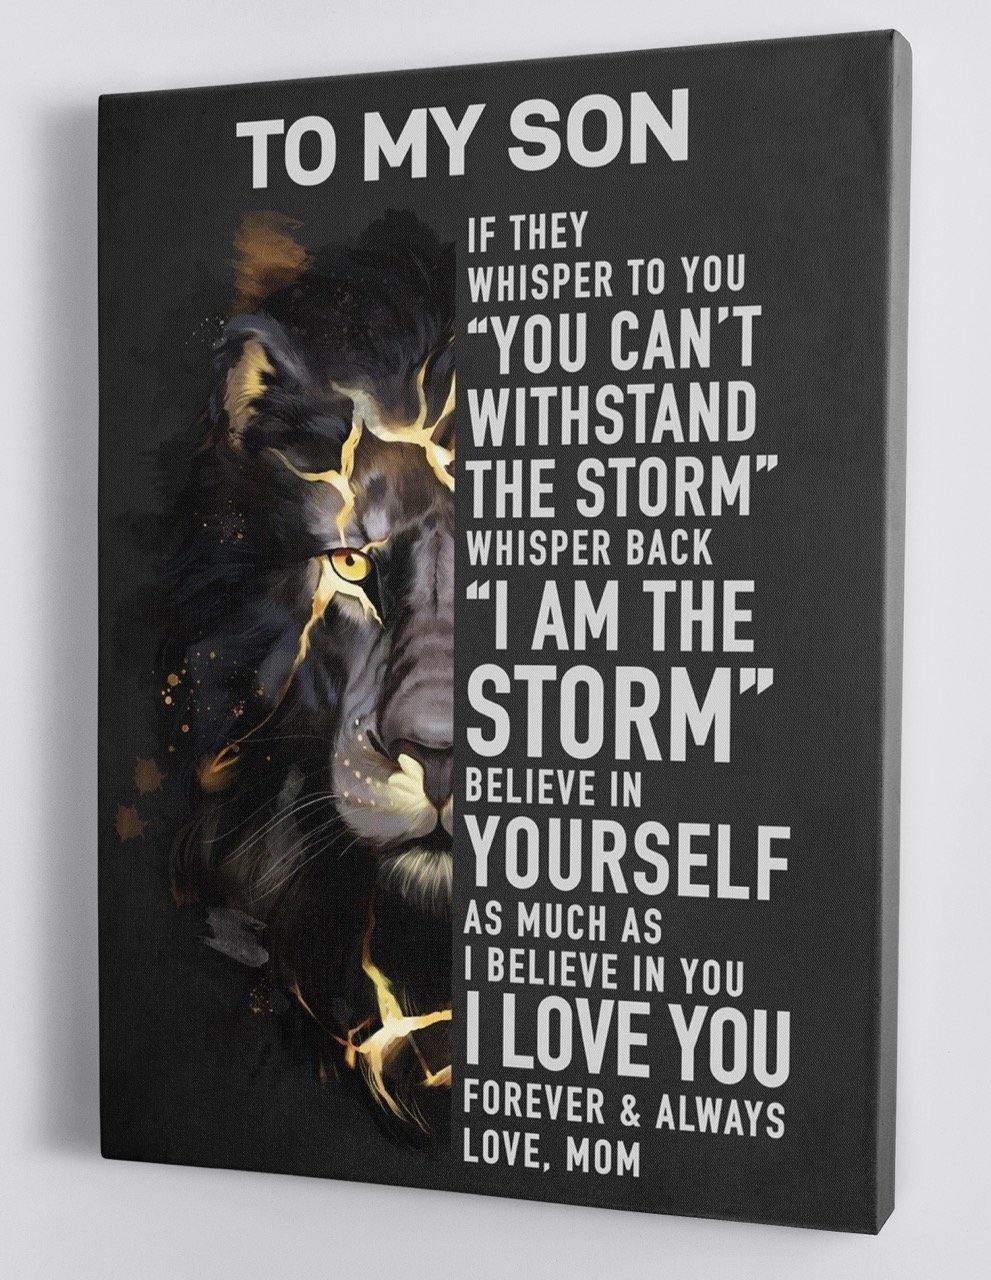 To My Son - From Mom - Framed Canvas Gift MS025 - DivesArt LLC